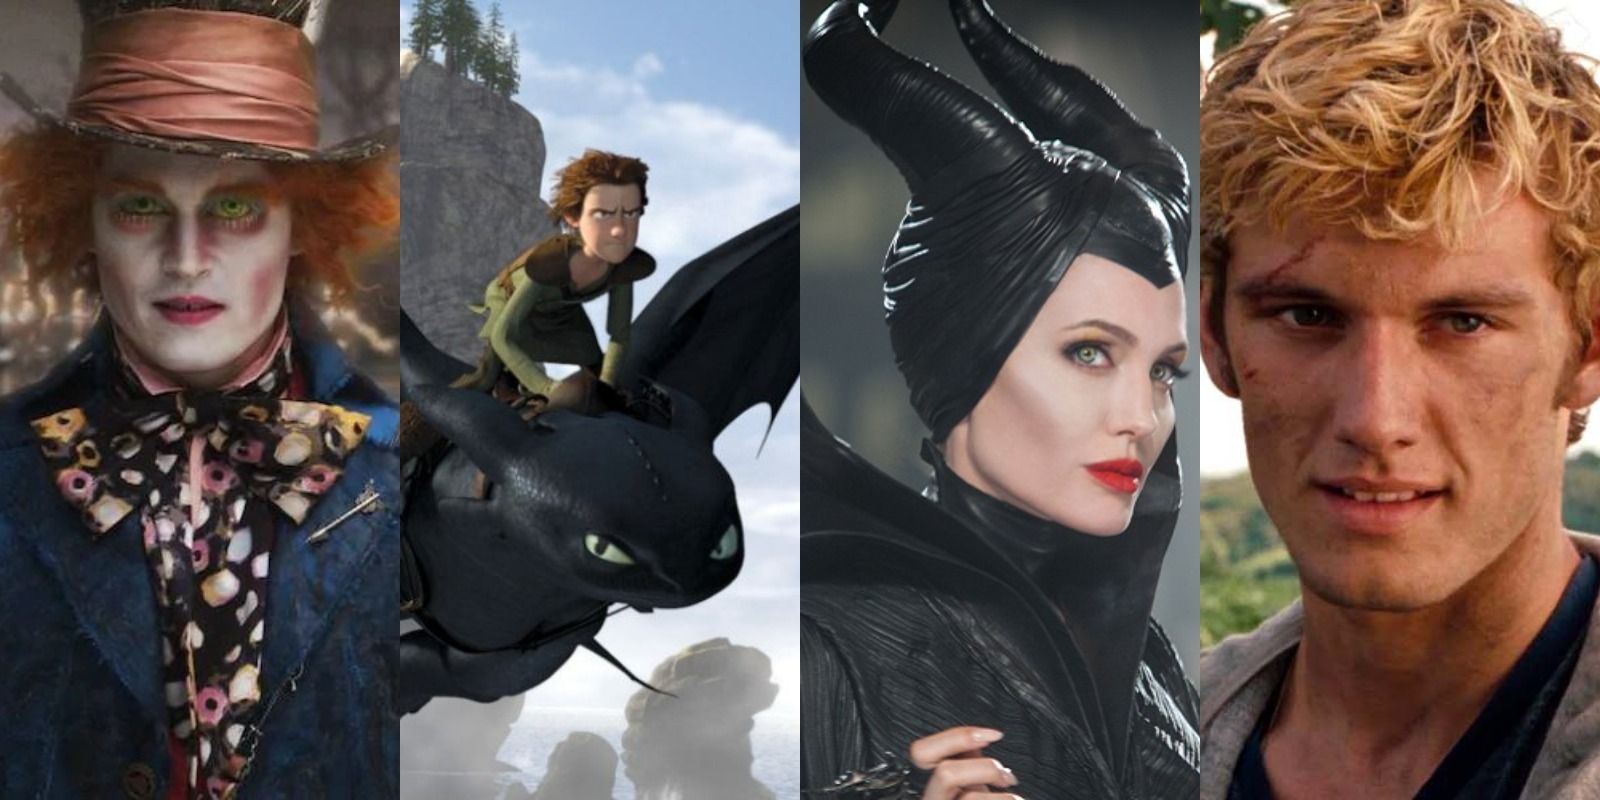 Alice in Wonderland, How to Train Your Dragon, Maleficent, and I am Number Four movie clips.